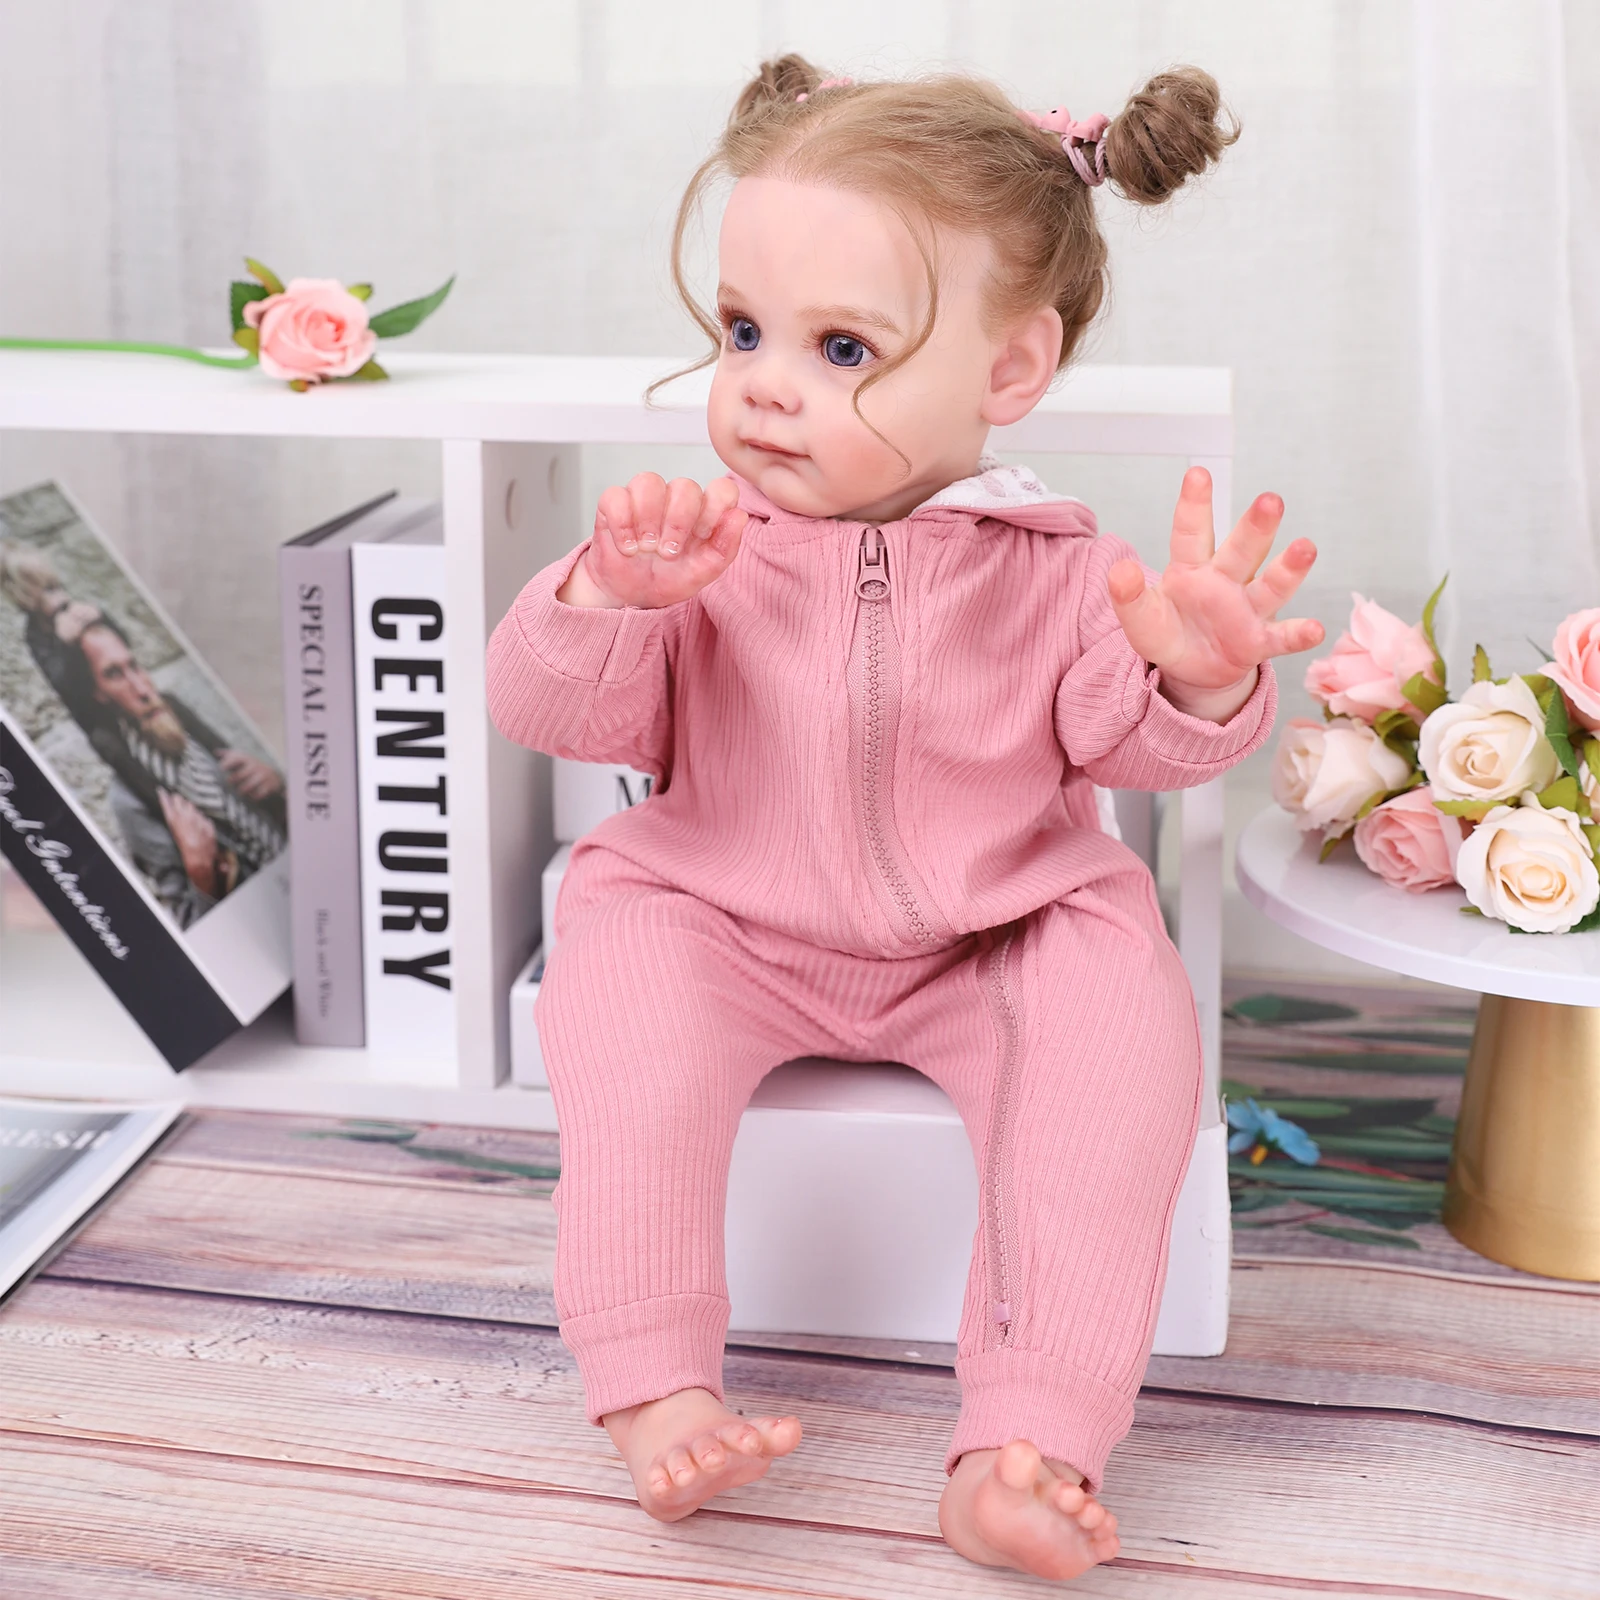 

55CM Reborn Doll Baby Toy 3D Skin Visible Vein Soft Silicone Cute Reborn Baby Doll Girls Children Simulation Baby Doll Toy Gifts